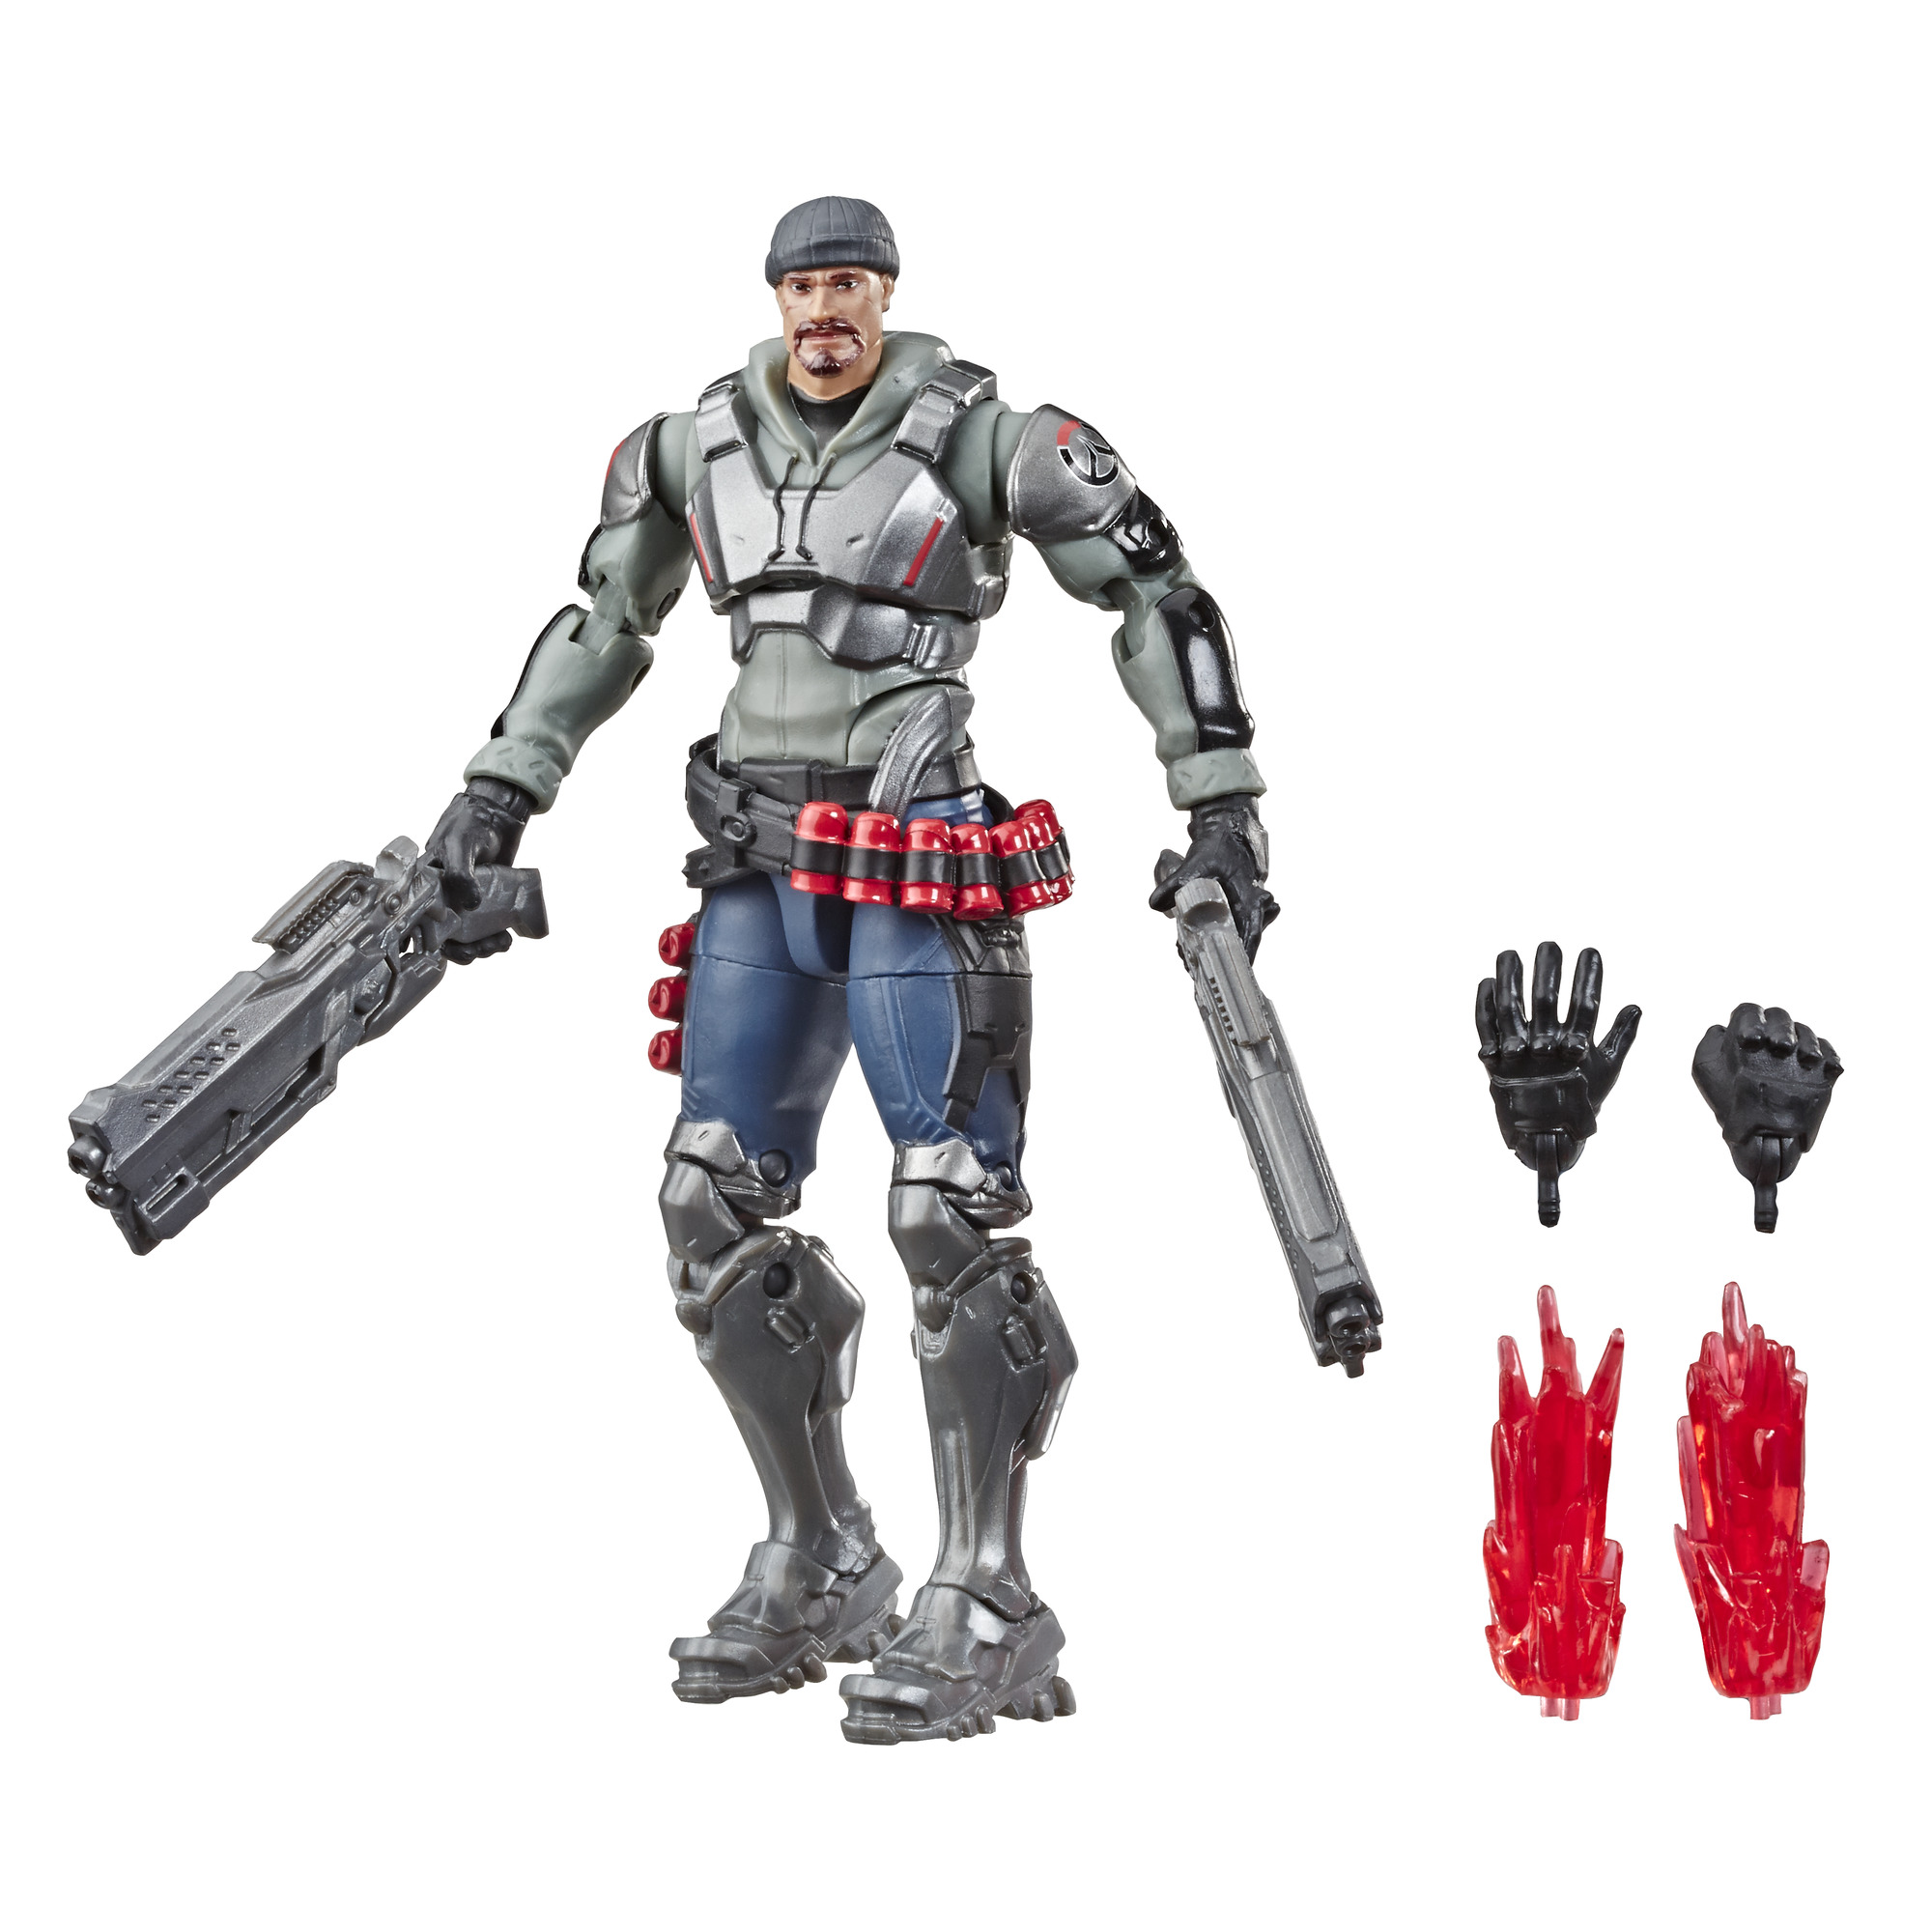 Overwatch Ultimates Soldier 76 Action Figure Hasbro 2019 Toy for sale online